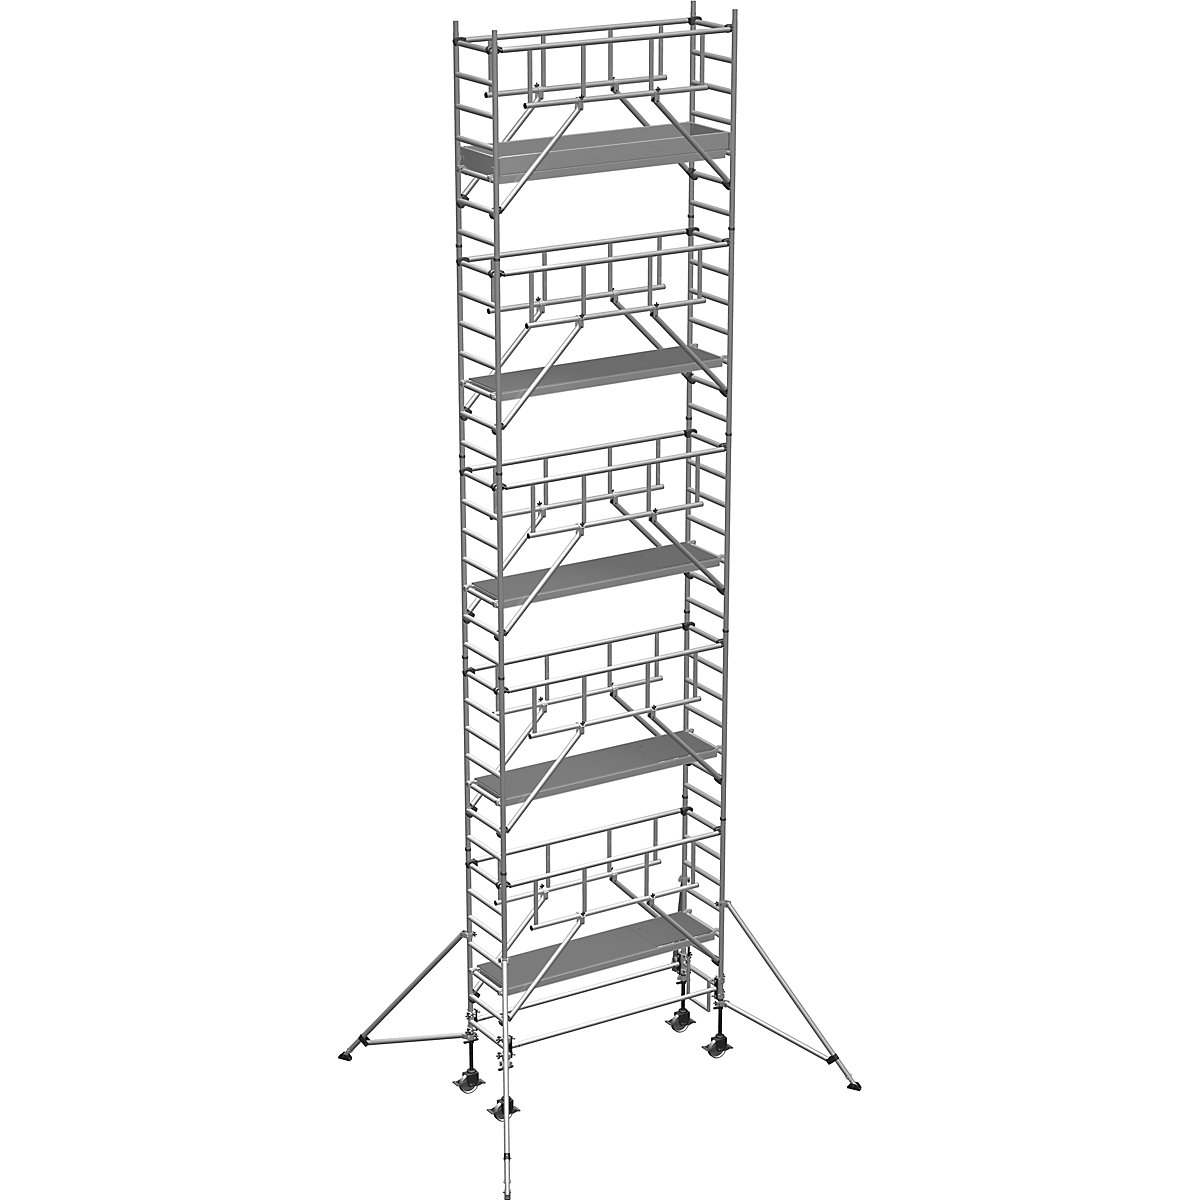 S-PLUS mobile access tower – ZARGES, platform 1.80 x 0.60 m, working height 11.20 m-8